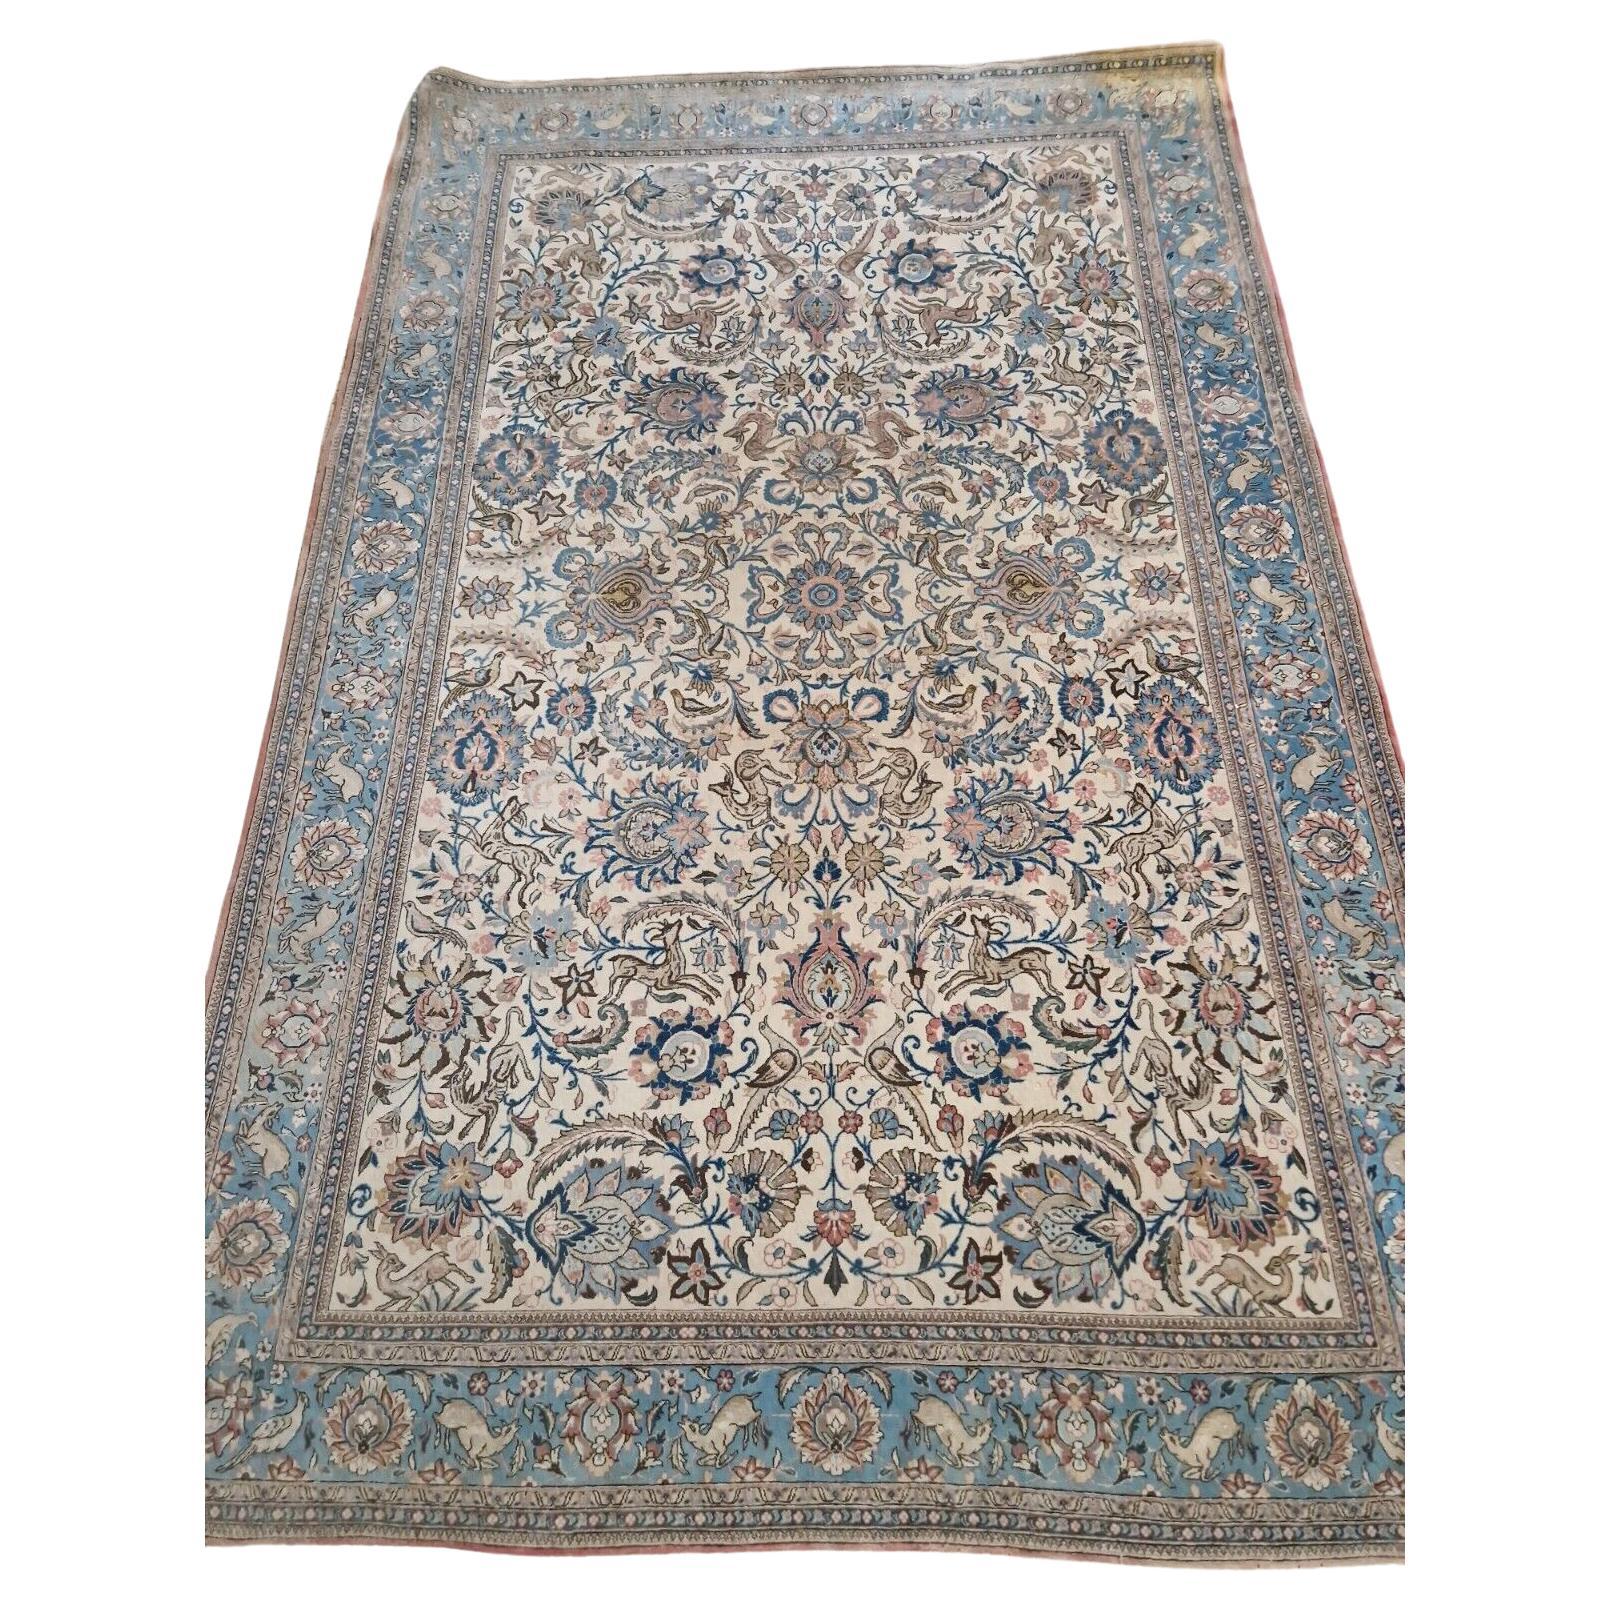 Hand-Woven Persian Rug from the city of Ghom 355 X 232 cm Wool and Silk For Sale